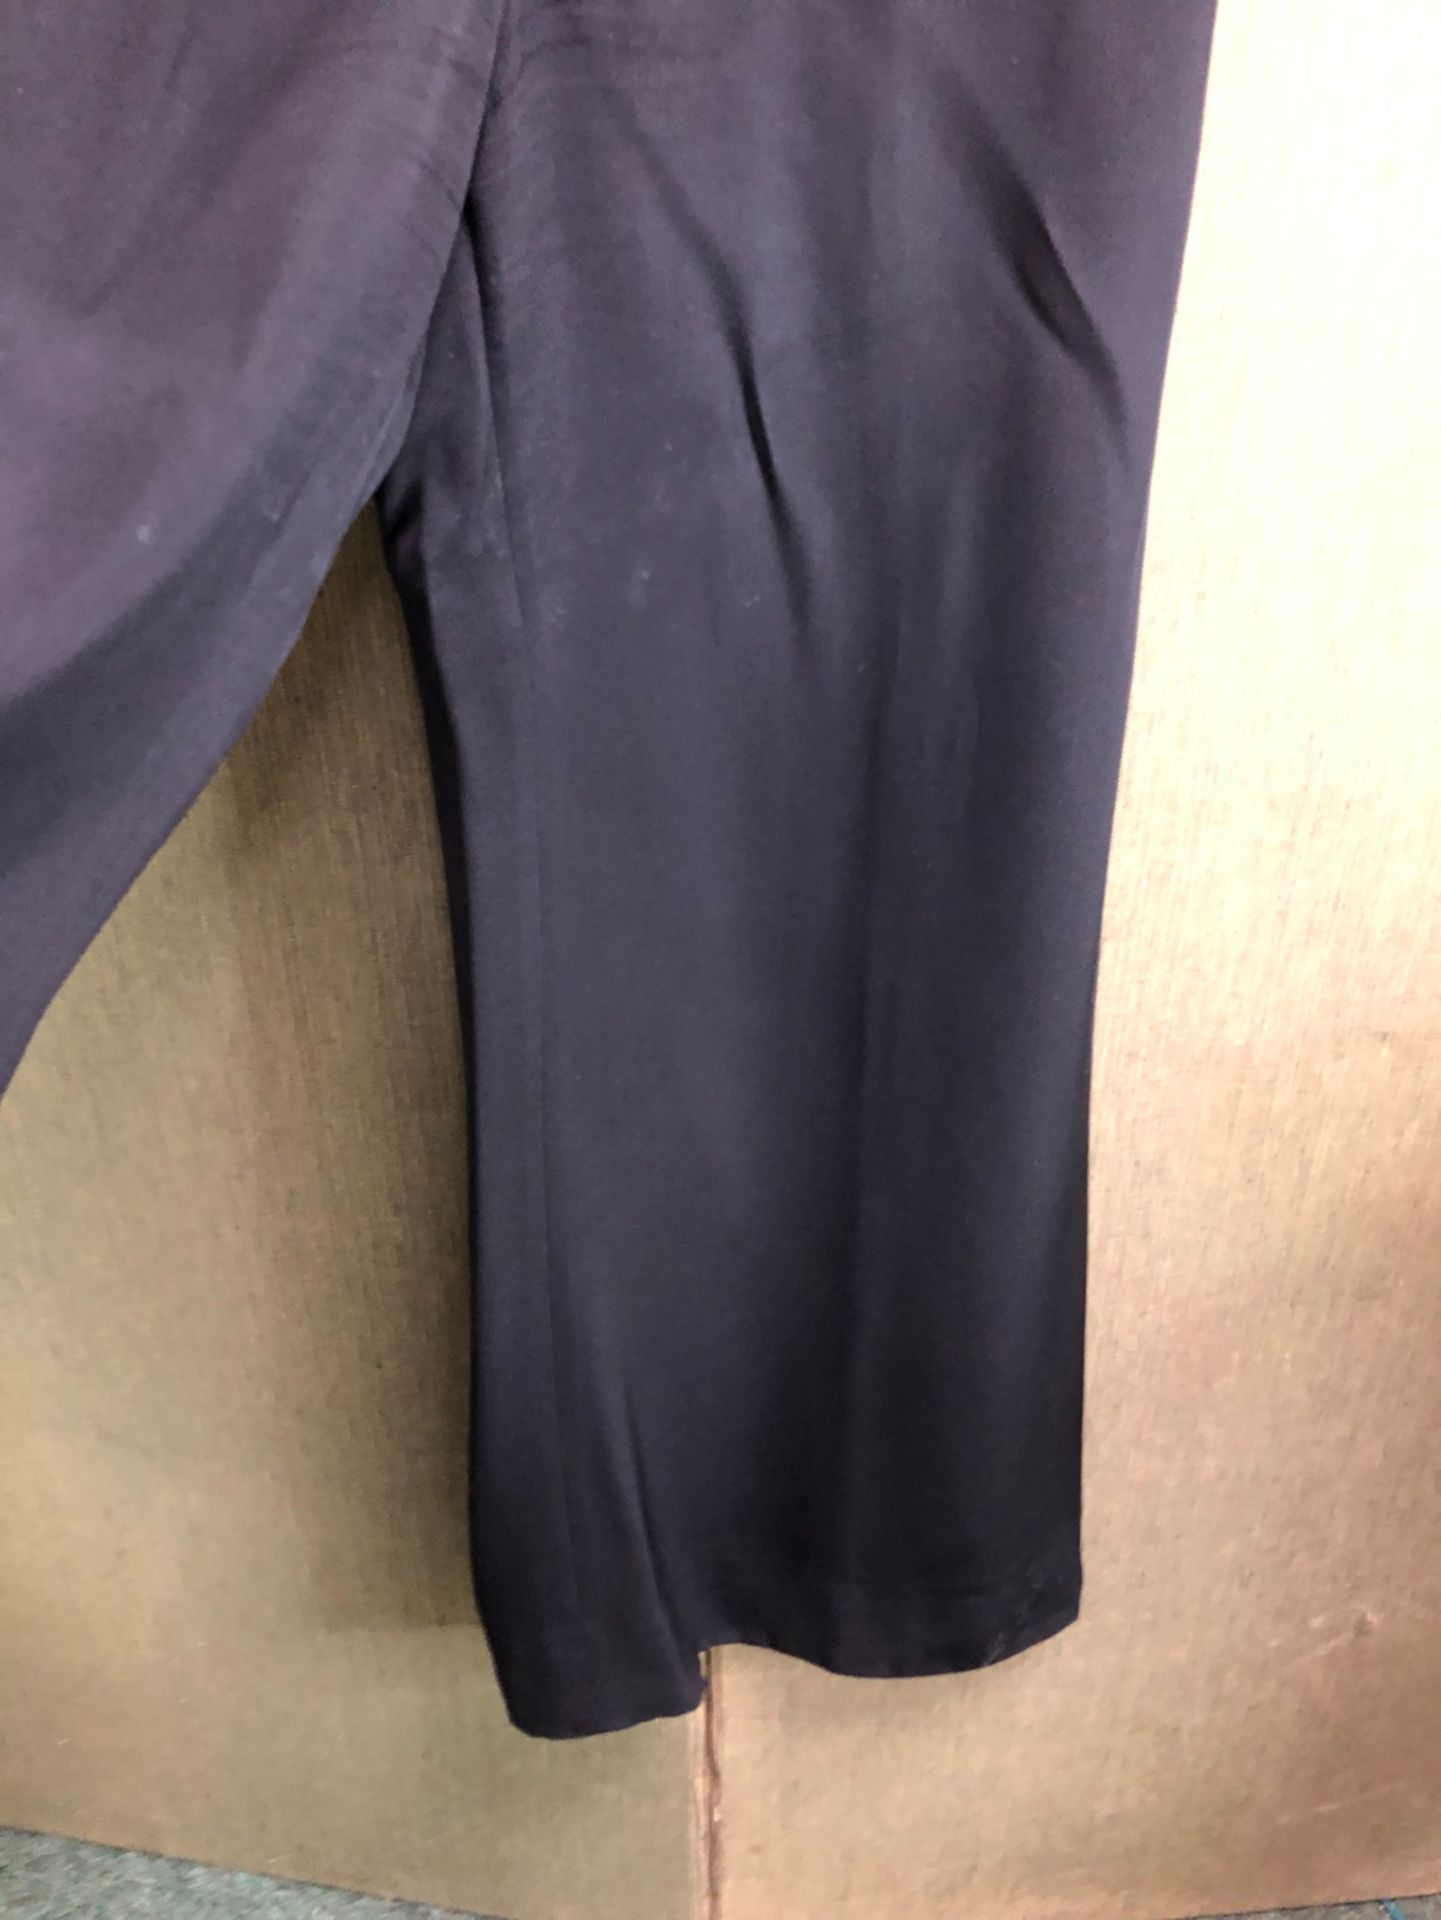 A PAIR OF WIDE LEGGED BLACK TROUSERS BY MARIO BORSATO COUTURE SIZE 44 AND A BLACK MARIO BORSATO - Image 17 of 25